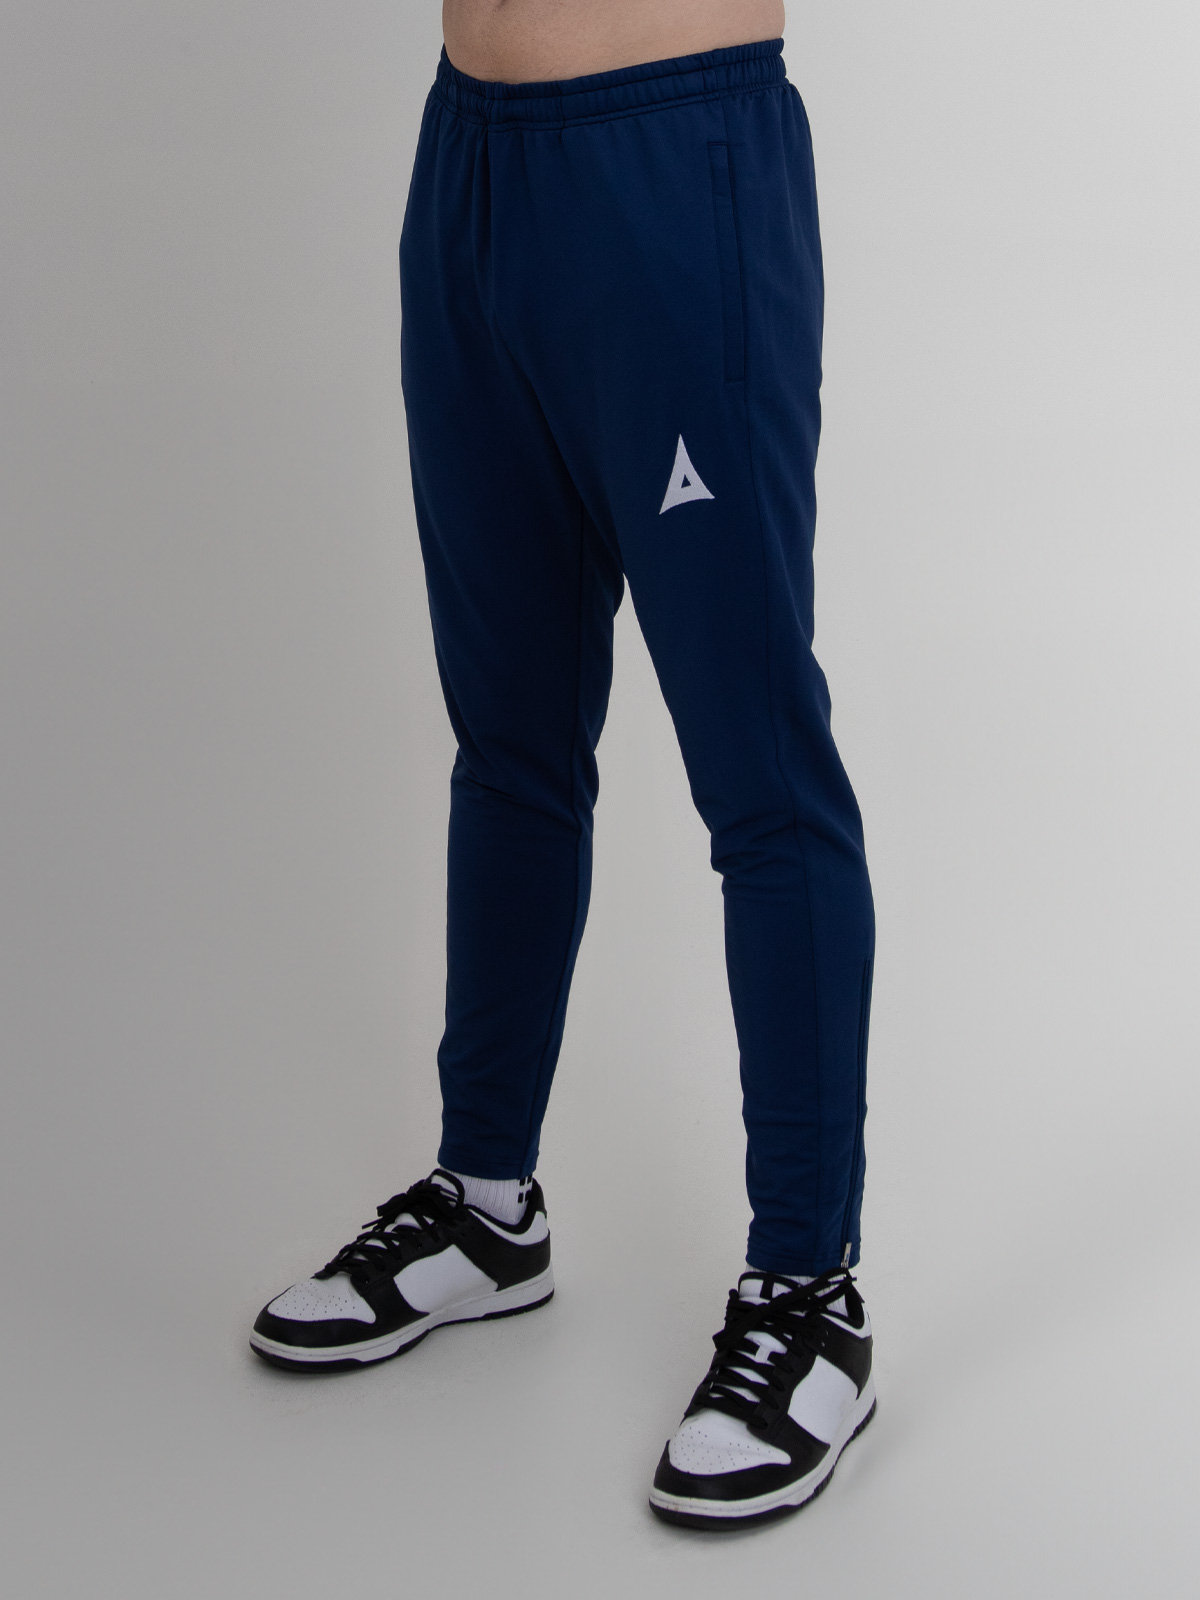 navy blue slim fit tracksuit bottoms for football are being worn